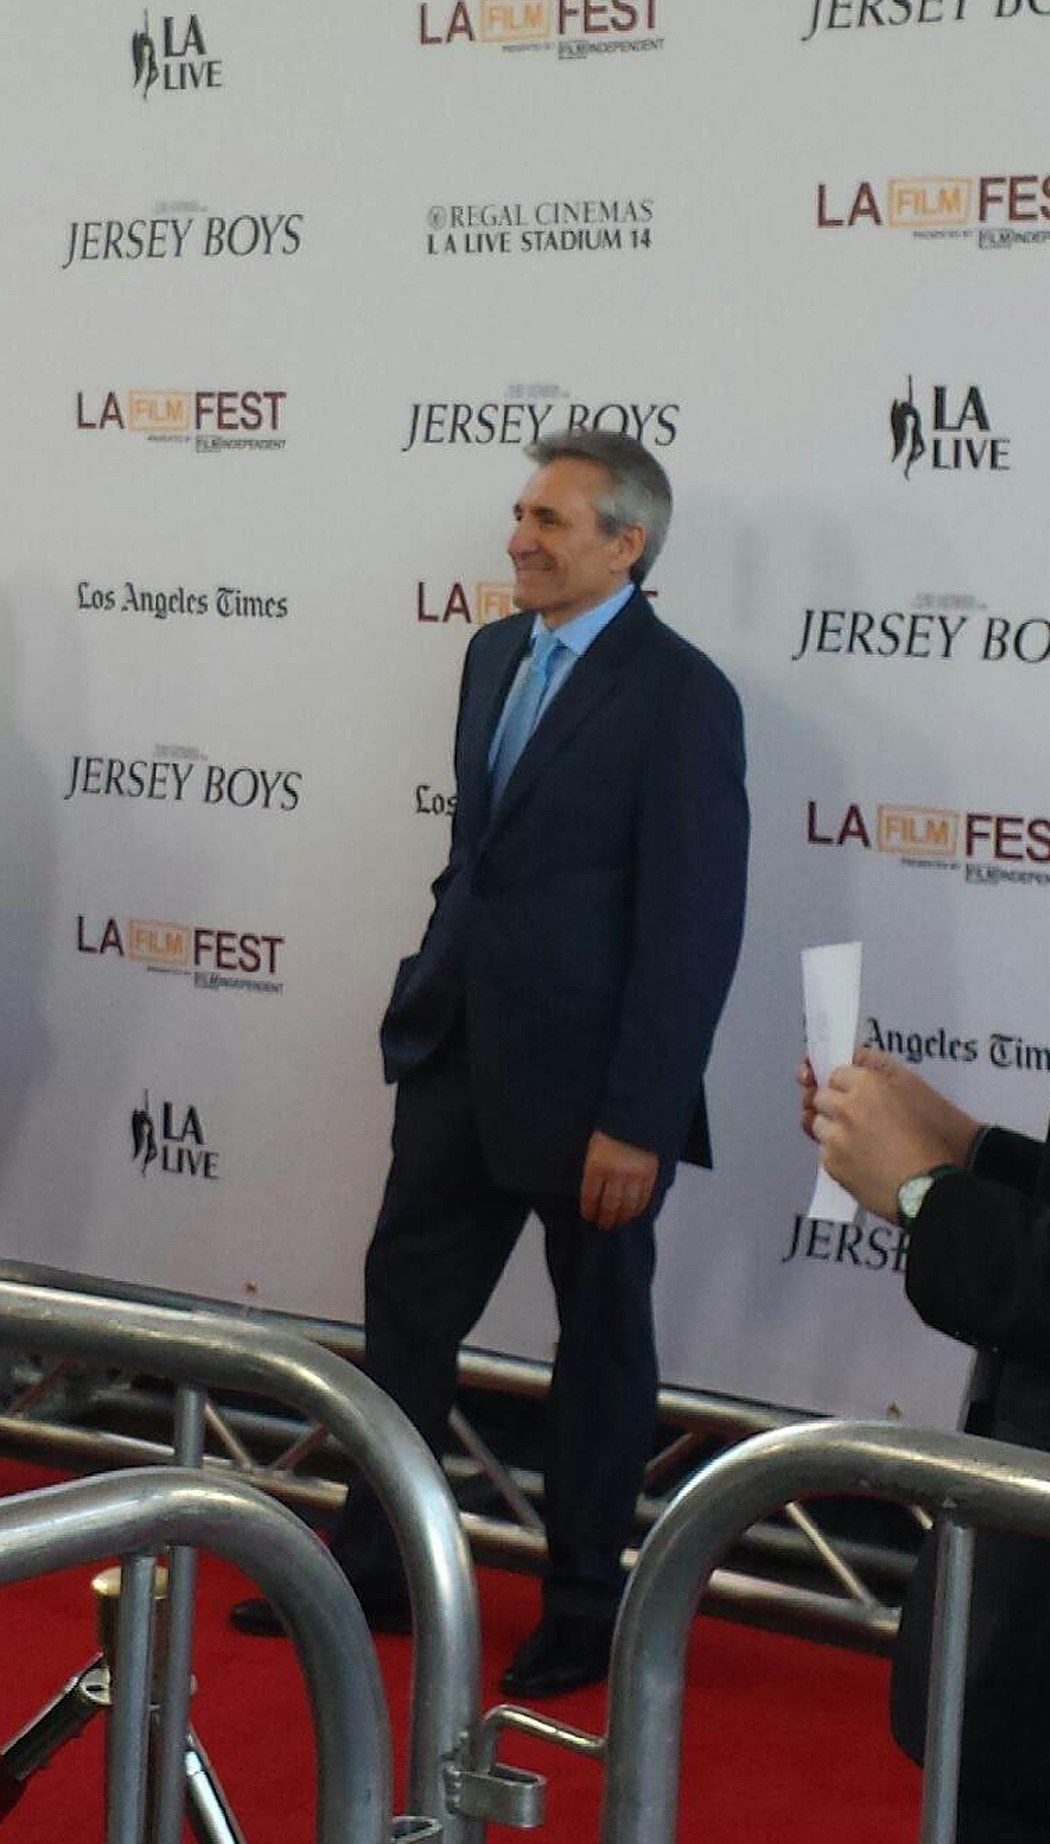 Lou Volpe on red carpet for the Jersey Boys movie premiere on closing night of the Los Angeles Film Festival.